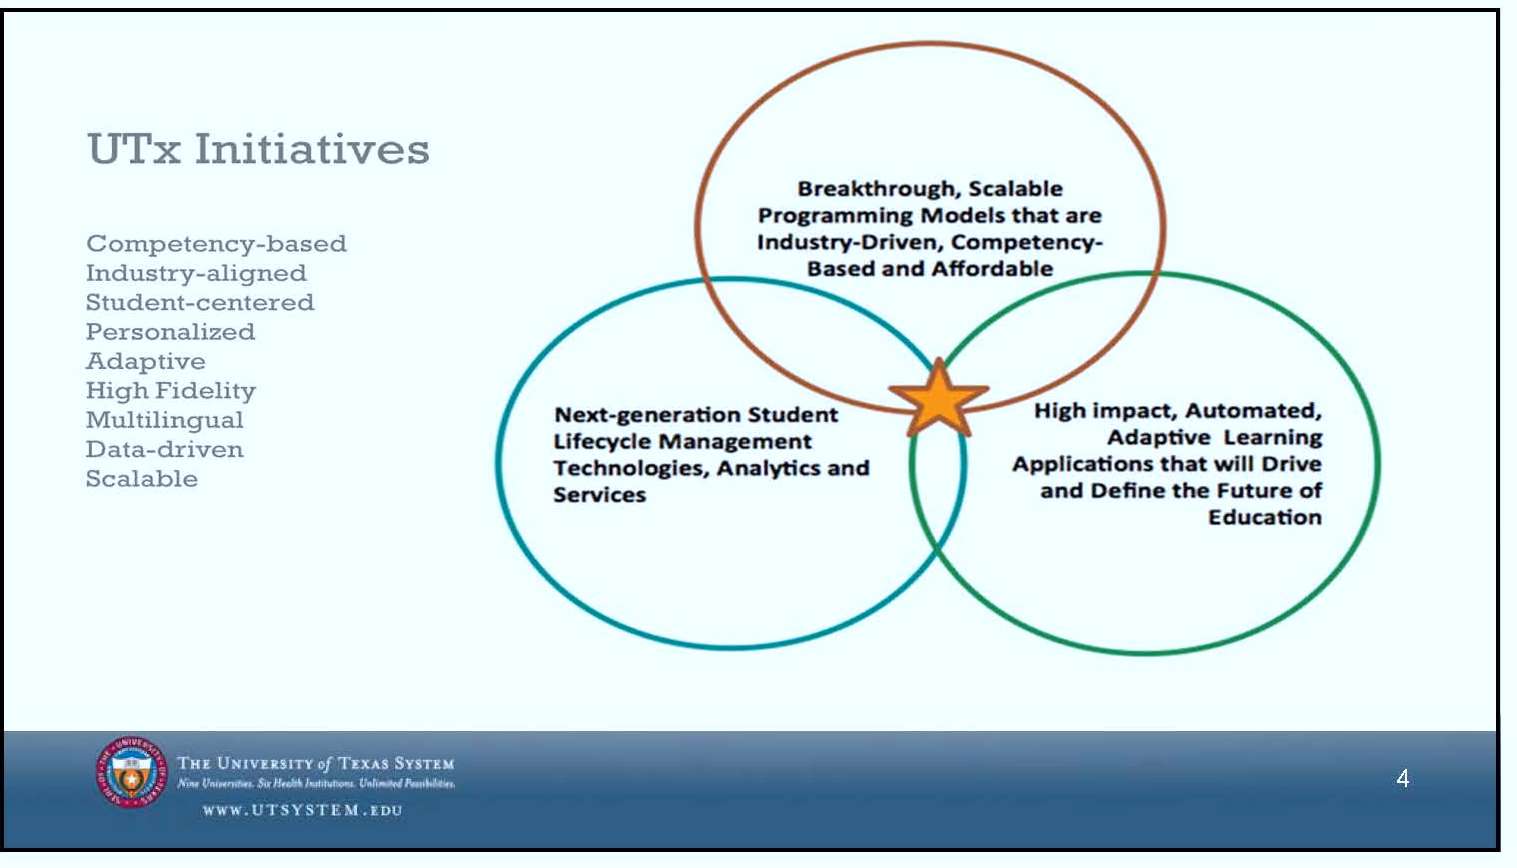 Graphic from the University of Texas System on UTx Initiatives: competency based, industry aligned, student centered, personalized, adaptive, high fidelity, multilingual, data driven, scalable. Venn diagram shows intersection of three segments: Next-generation student lifecycle management technologies, analytics, and services, for one; Breakthrough, scalable programming models that are industry-driven competency based and affordable, for another; and High-impact, automated, adaptive learning applications that will drive and define the future of education for a third.